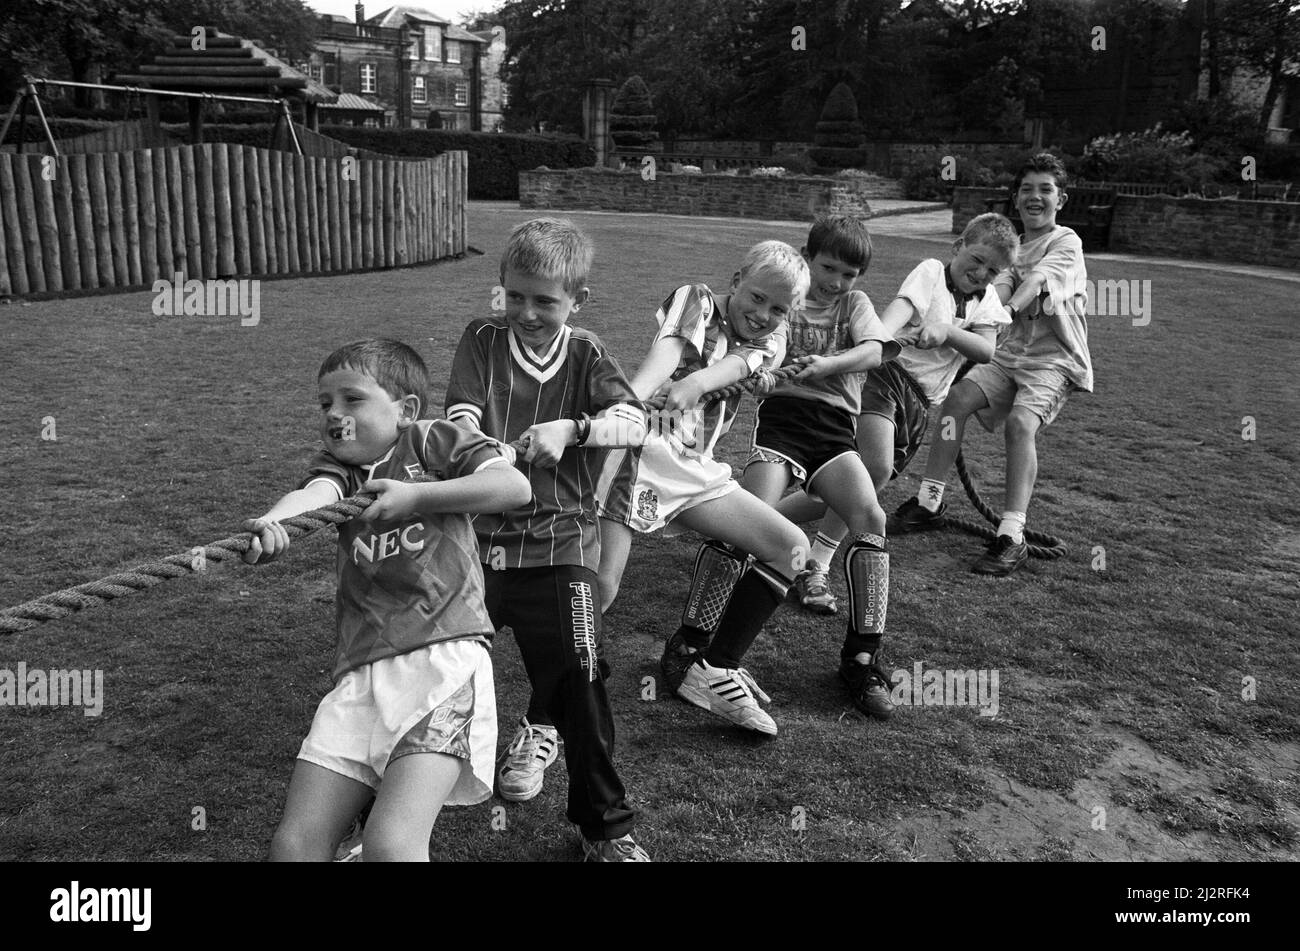 On the ropes... these cubs are in training for a tug-of-war competition at Meltham Gala. The youngsters - from the Friday pack of the 5th Holme Valley (Meltham) Cubs - are (from left): Christopher Berry, Dean Sykes, Richard Berry, Martin Loyd, Sam Philpot and David Chitty. The gala week starts on June 27 and will climax with the gala in Meltham Hall Park on Sunday, July 5. This will feature a parade - complete with floats - from Broadlands to the park. The gala will feature rides, charity stalls, a coal carrying competition, the Cubs tug-of-war, Meltham and Meltham Mills Band and majorettes. G Stock Photo